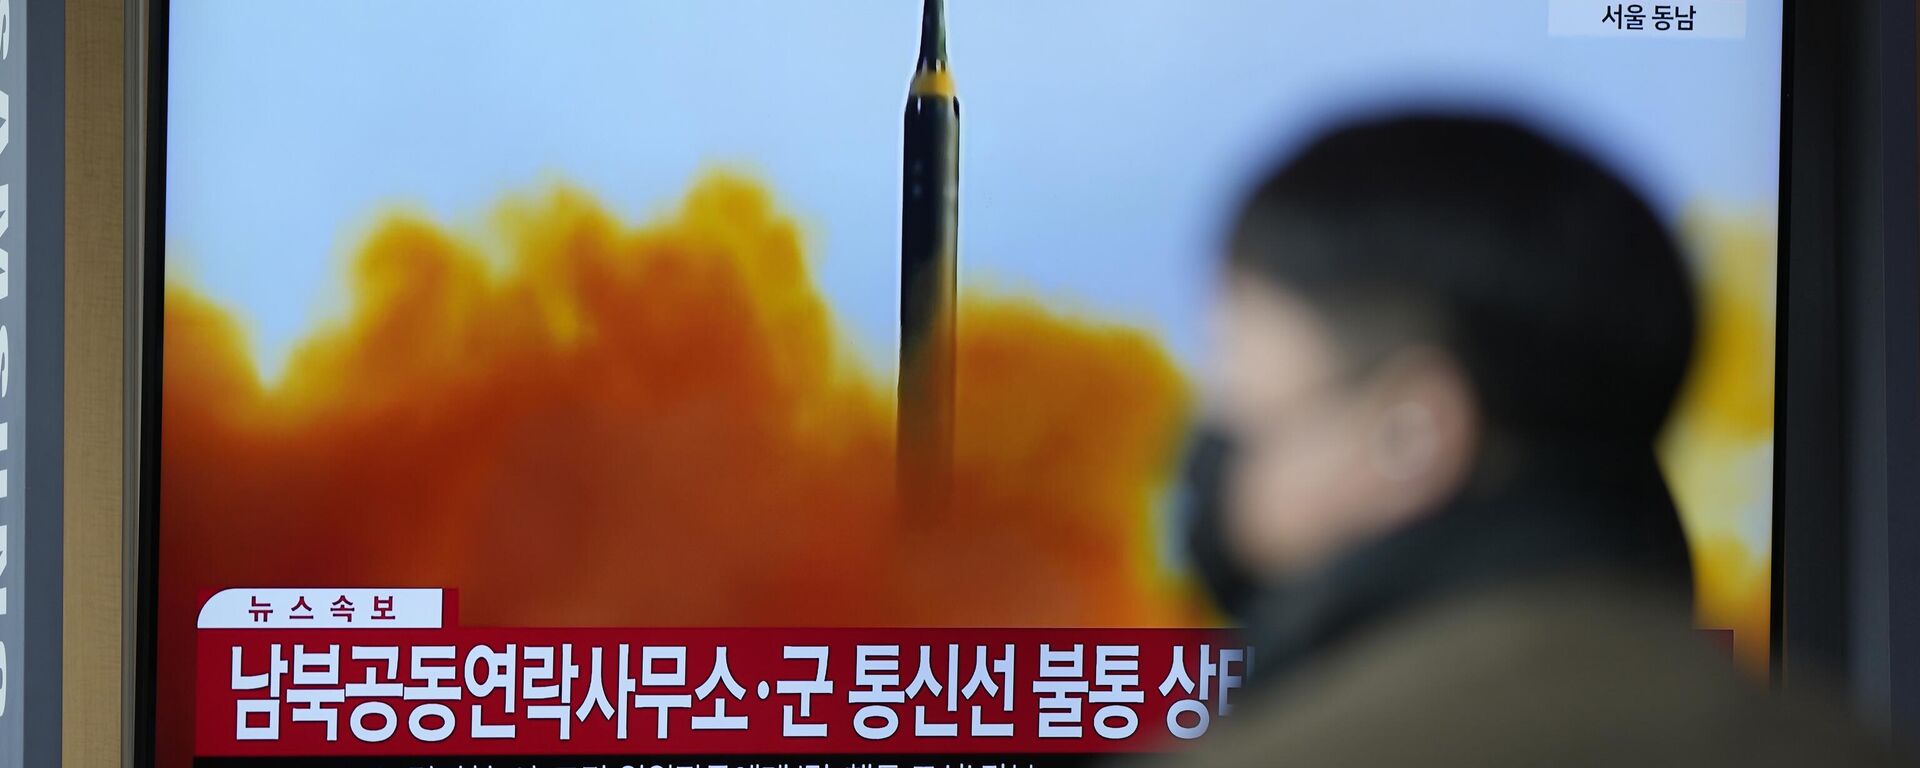 A TV screen is seen reporting North Korea's missile launch with file footage during a news program at the Seoul Railway Station in Seoul, South Korea, Thursday, April 13, 2023. North Korea launched a ballistic missile that landed in the waters between the Korean Peninsula and Japan on Thursday, prompting Japan to order residents on an island to take shelter as a precaution. The order has been lifted. - Sputnik Africa, 1920, 14.04.2023